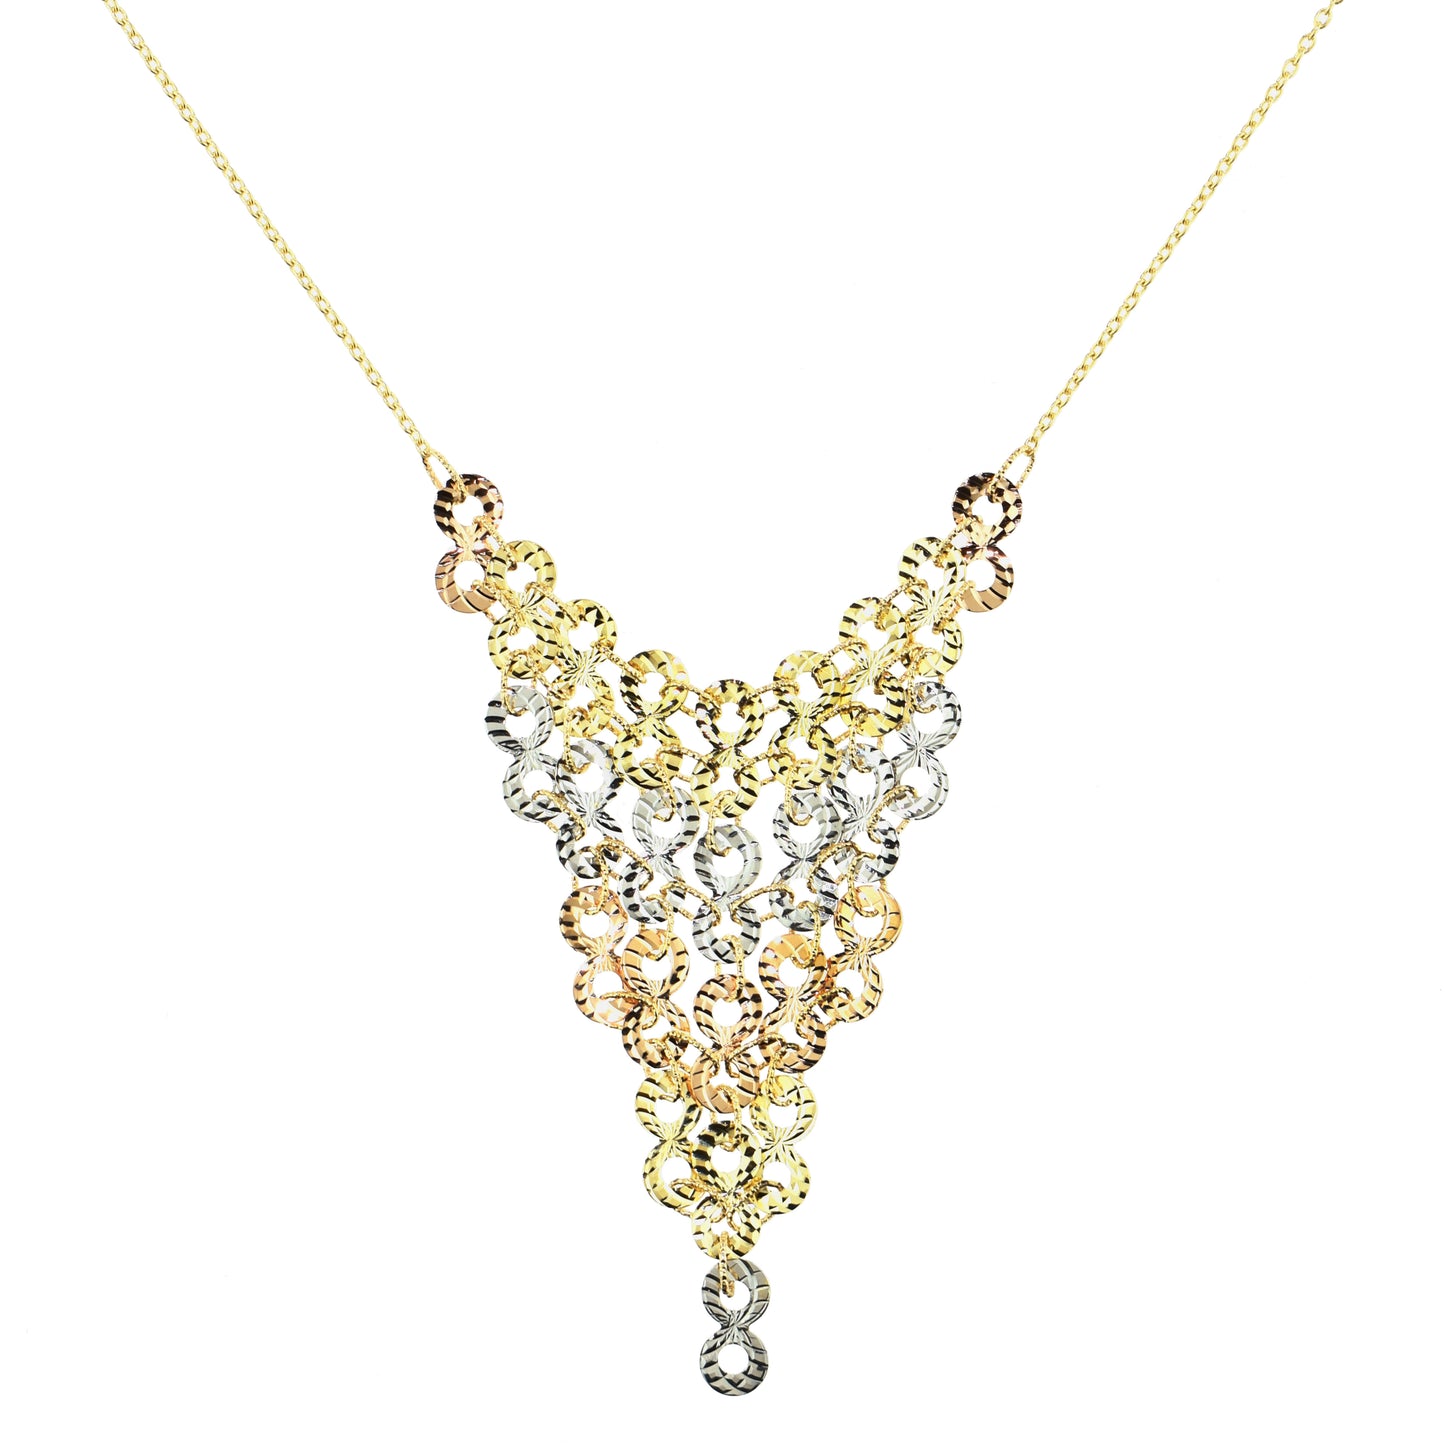 Séchic 14k Rose, White & Yellow Gold Infinity Netted 3 Tone Necklace 18"